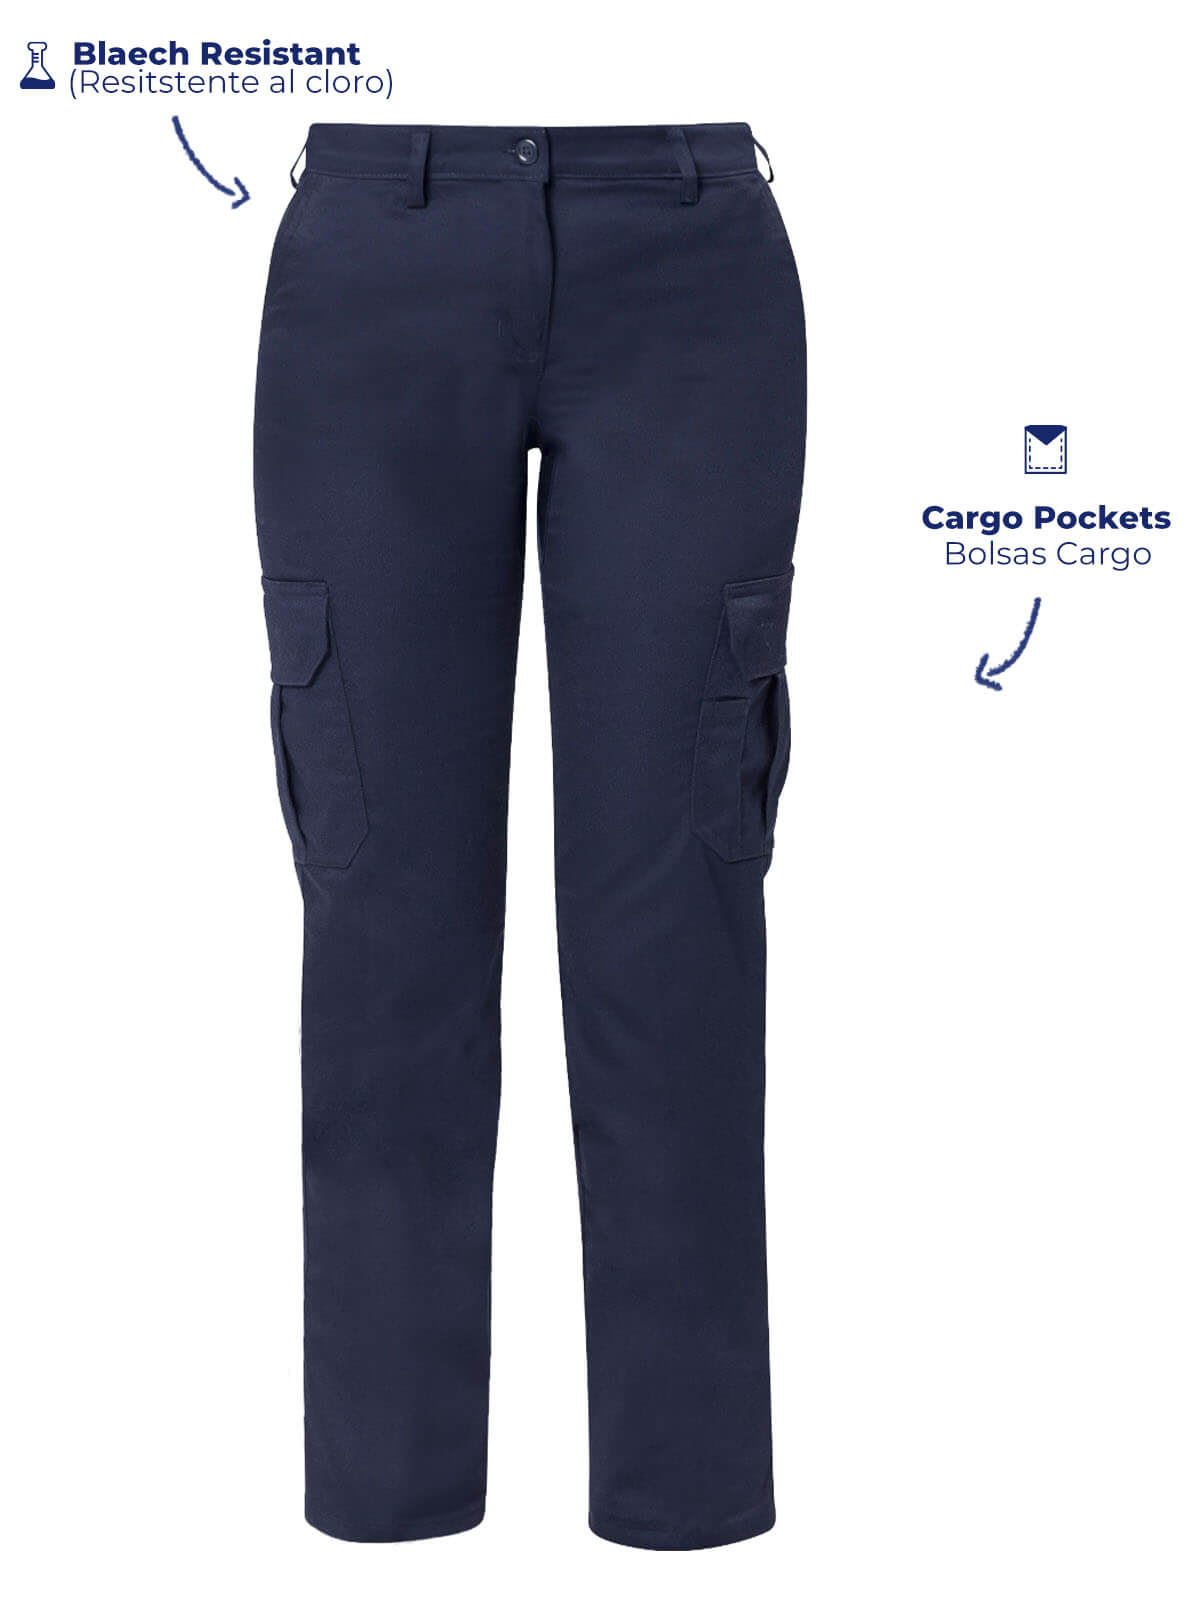 Cargo Pants for women navy color